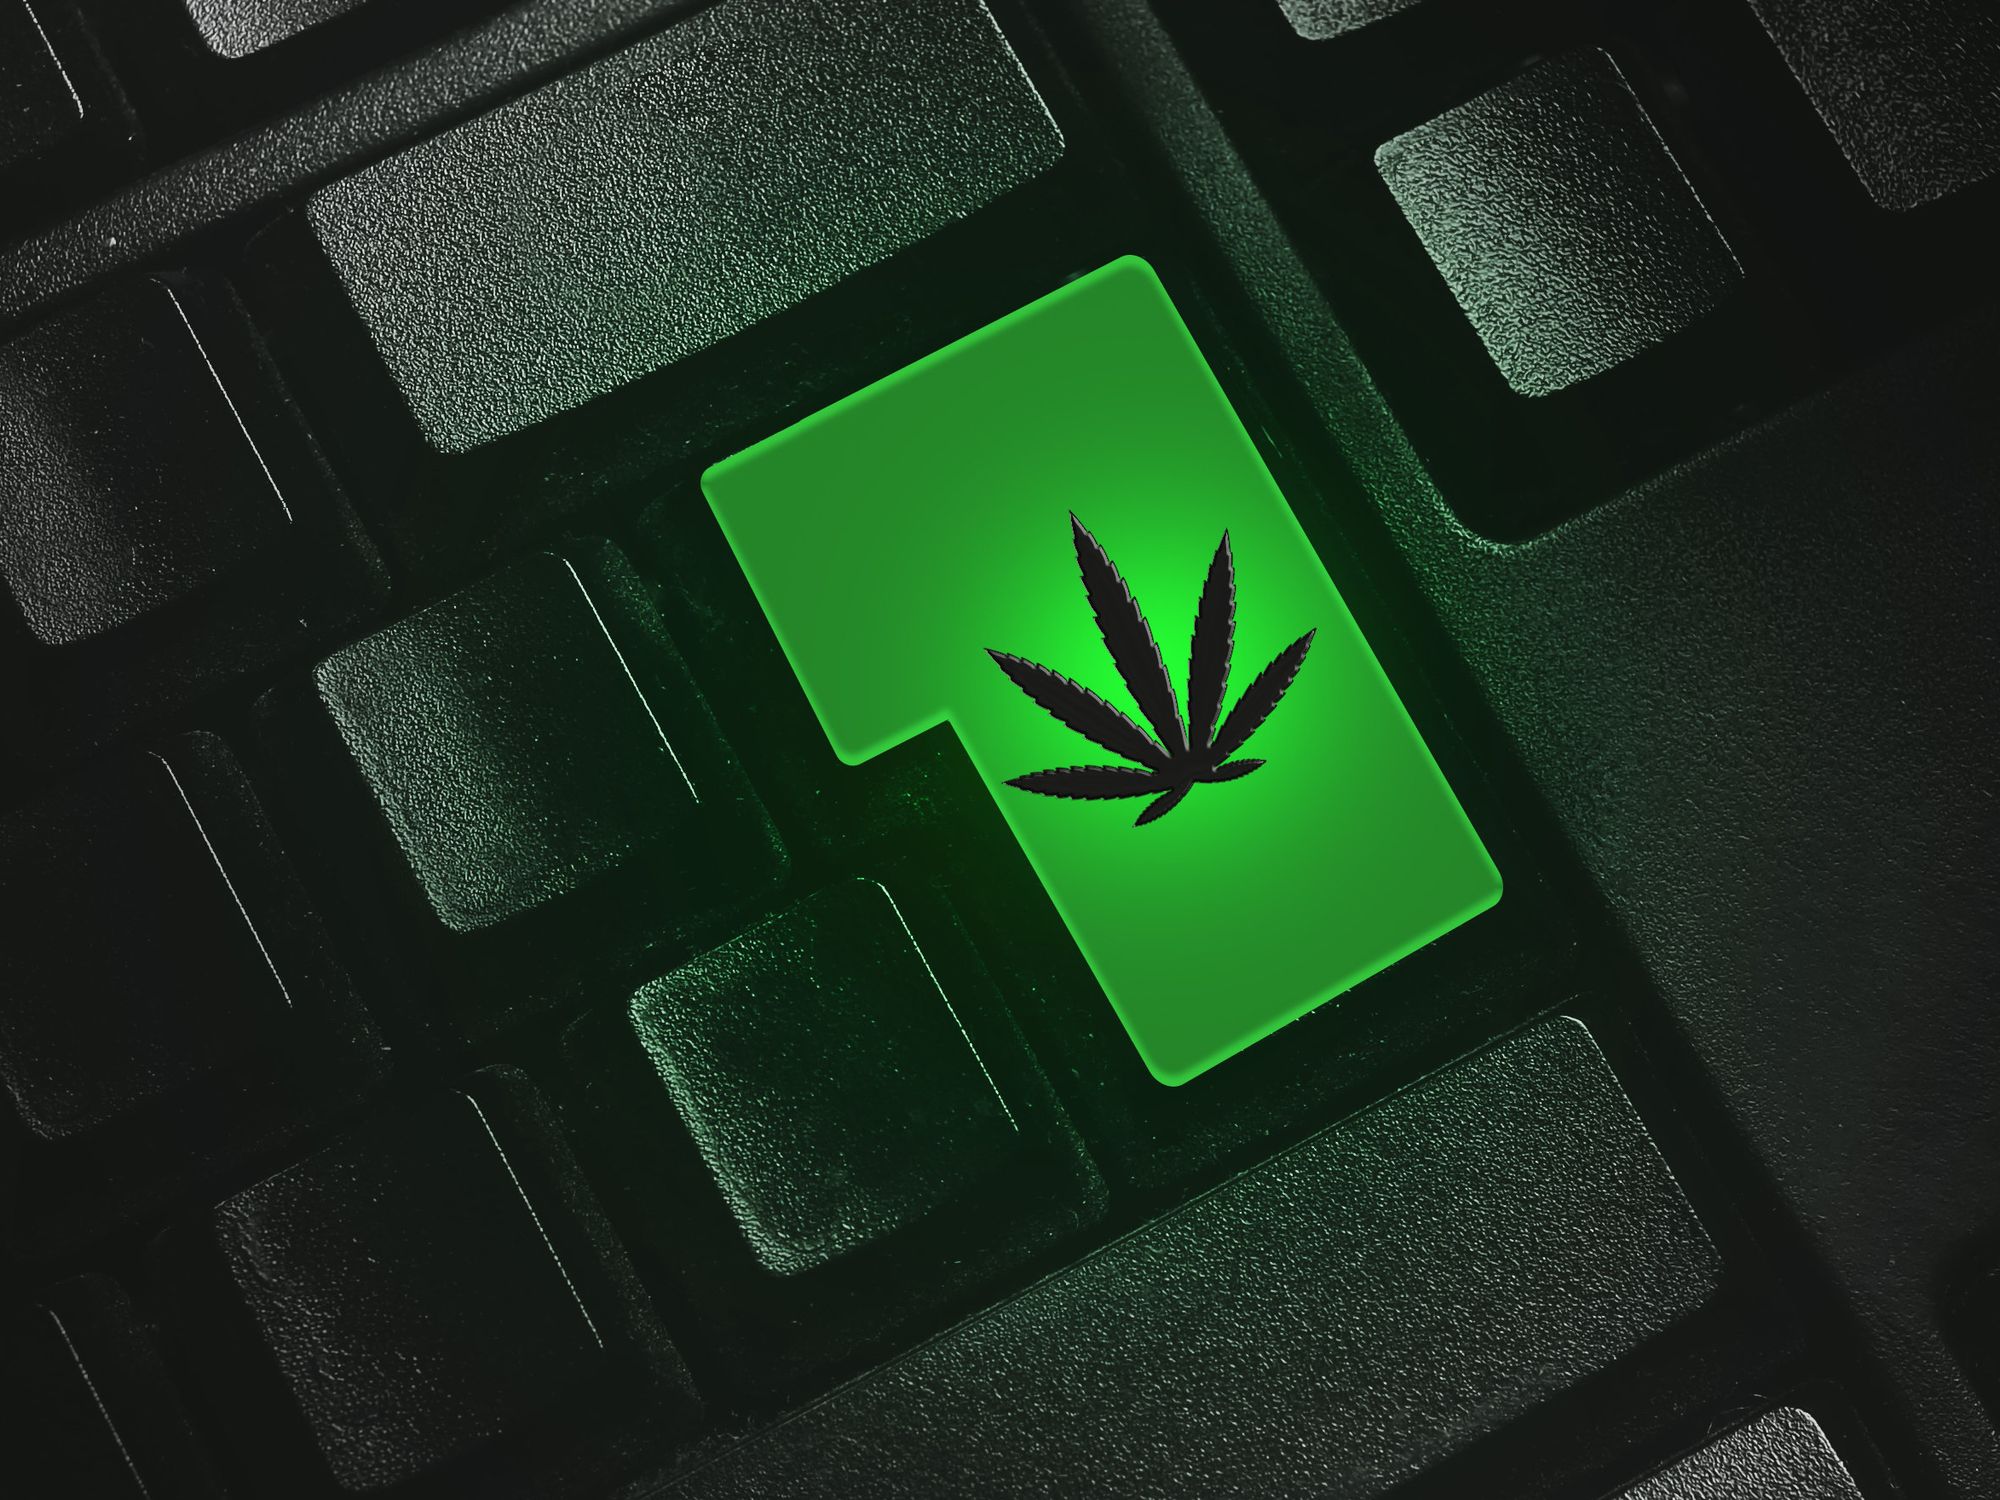 'We're Not Selling Weed, We're Selling Software': How Tech Gets Caught in Marijuana Laws